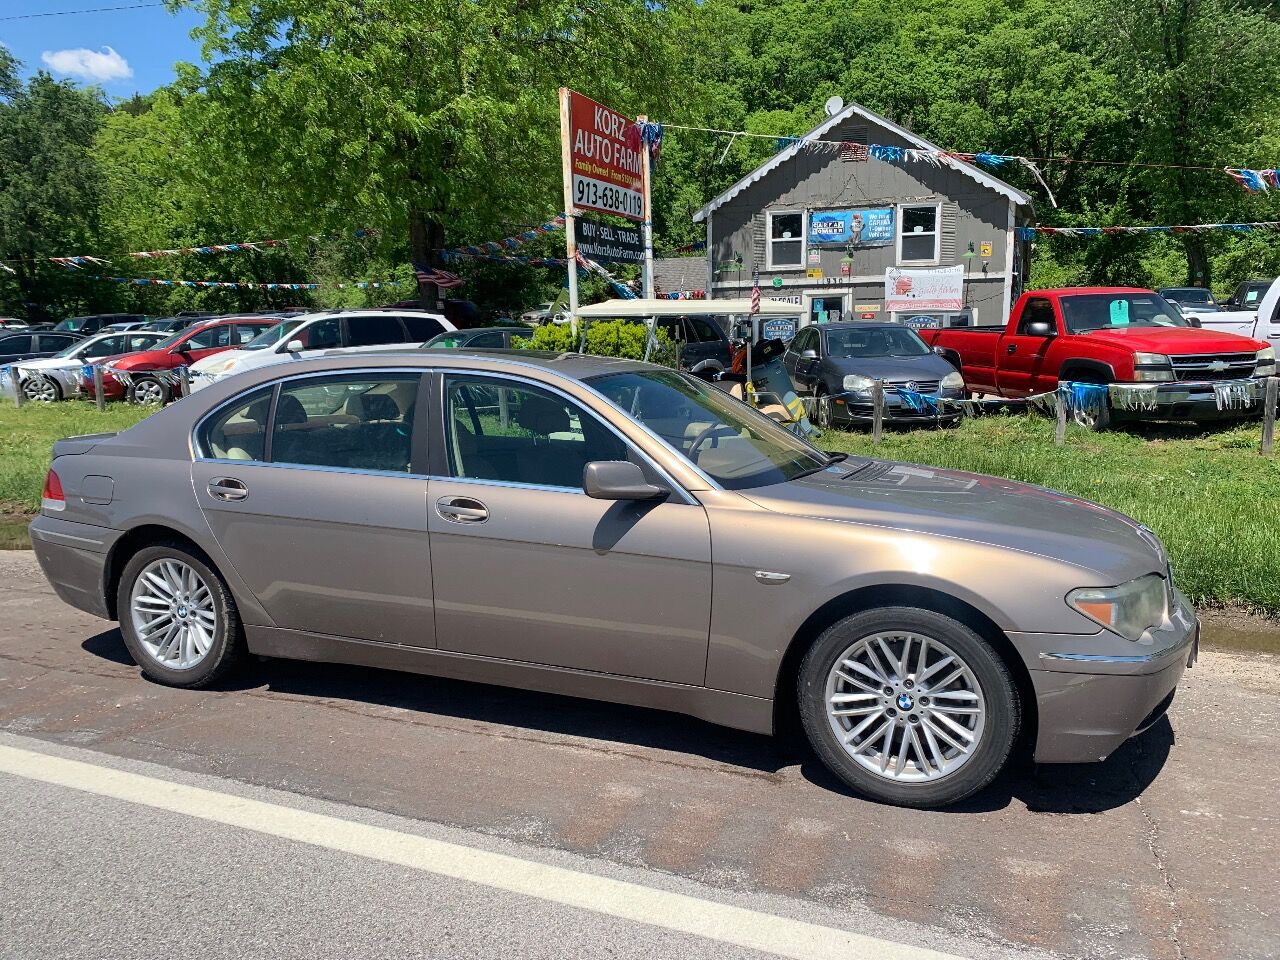 2004 BMW 7 Series For Sale - Carsforsale.com®